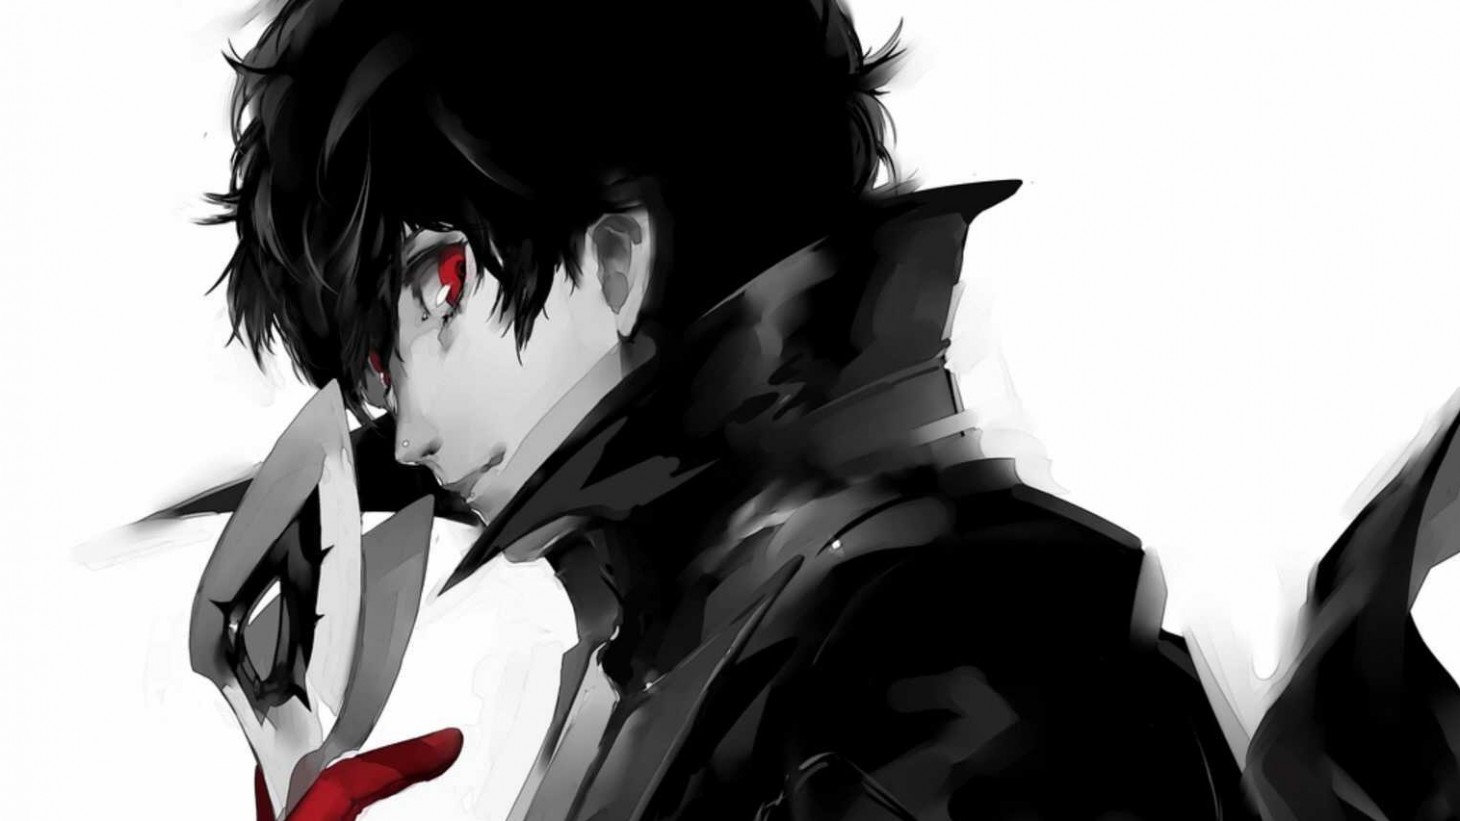 Persona 5 Royal was the best game released in 2020, according to